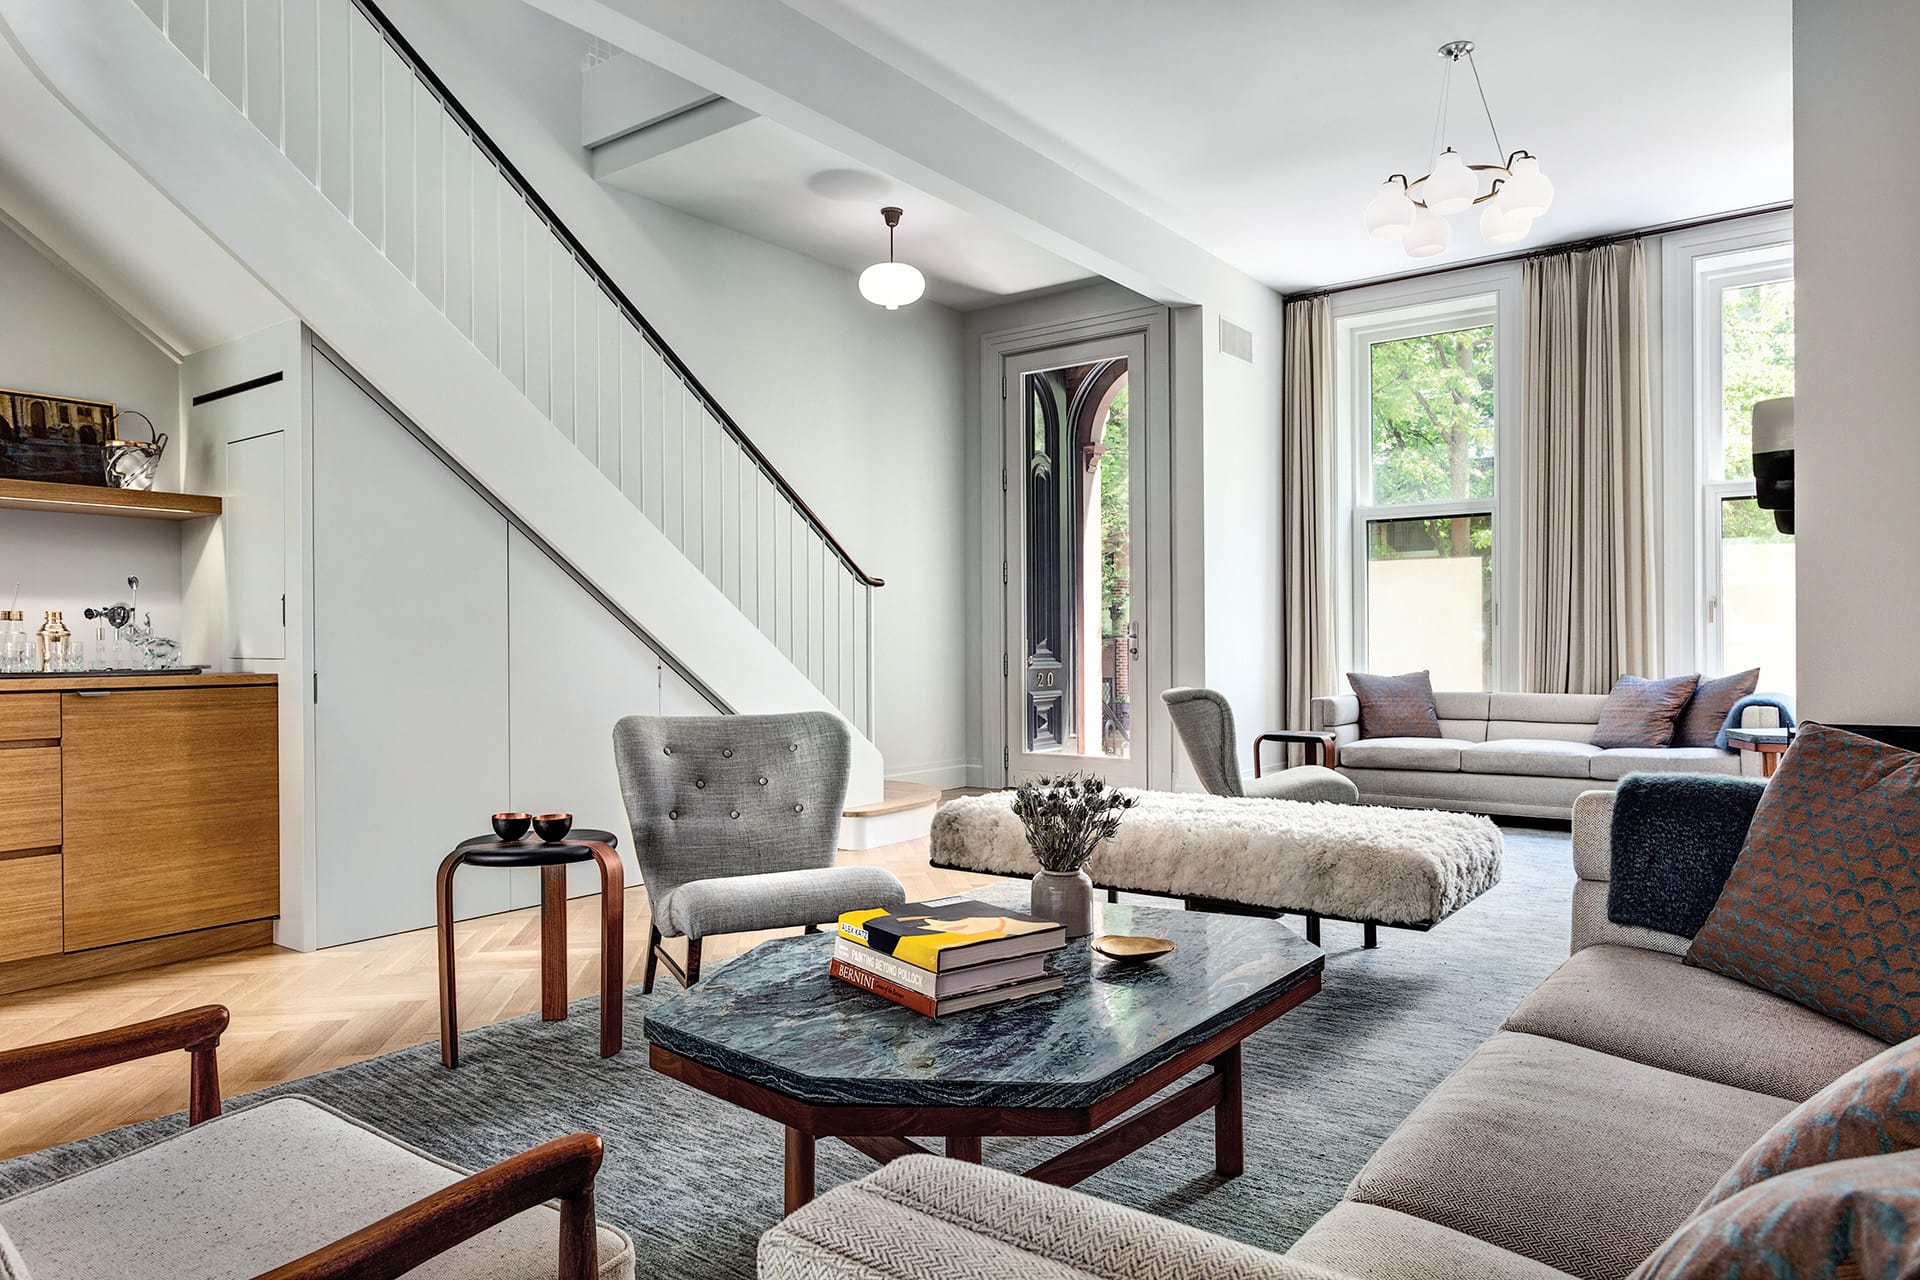 Living room and entry of a Brooklyn Heights Passive House. A dry bar sits underneath the staircase in front of the front door. Chairs, a coffee table, and couches are atop a grey carpet.